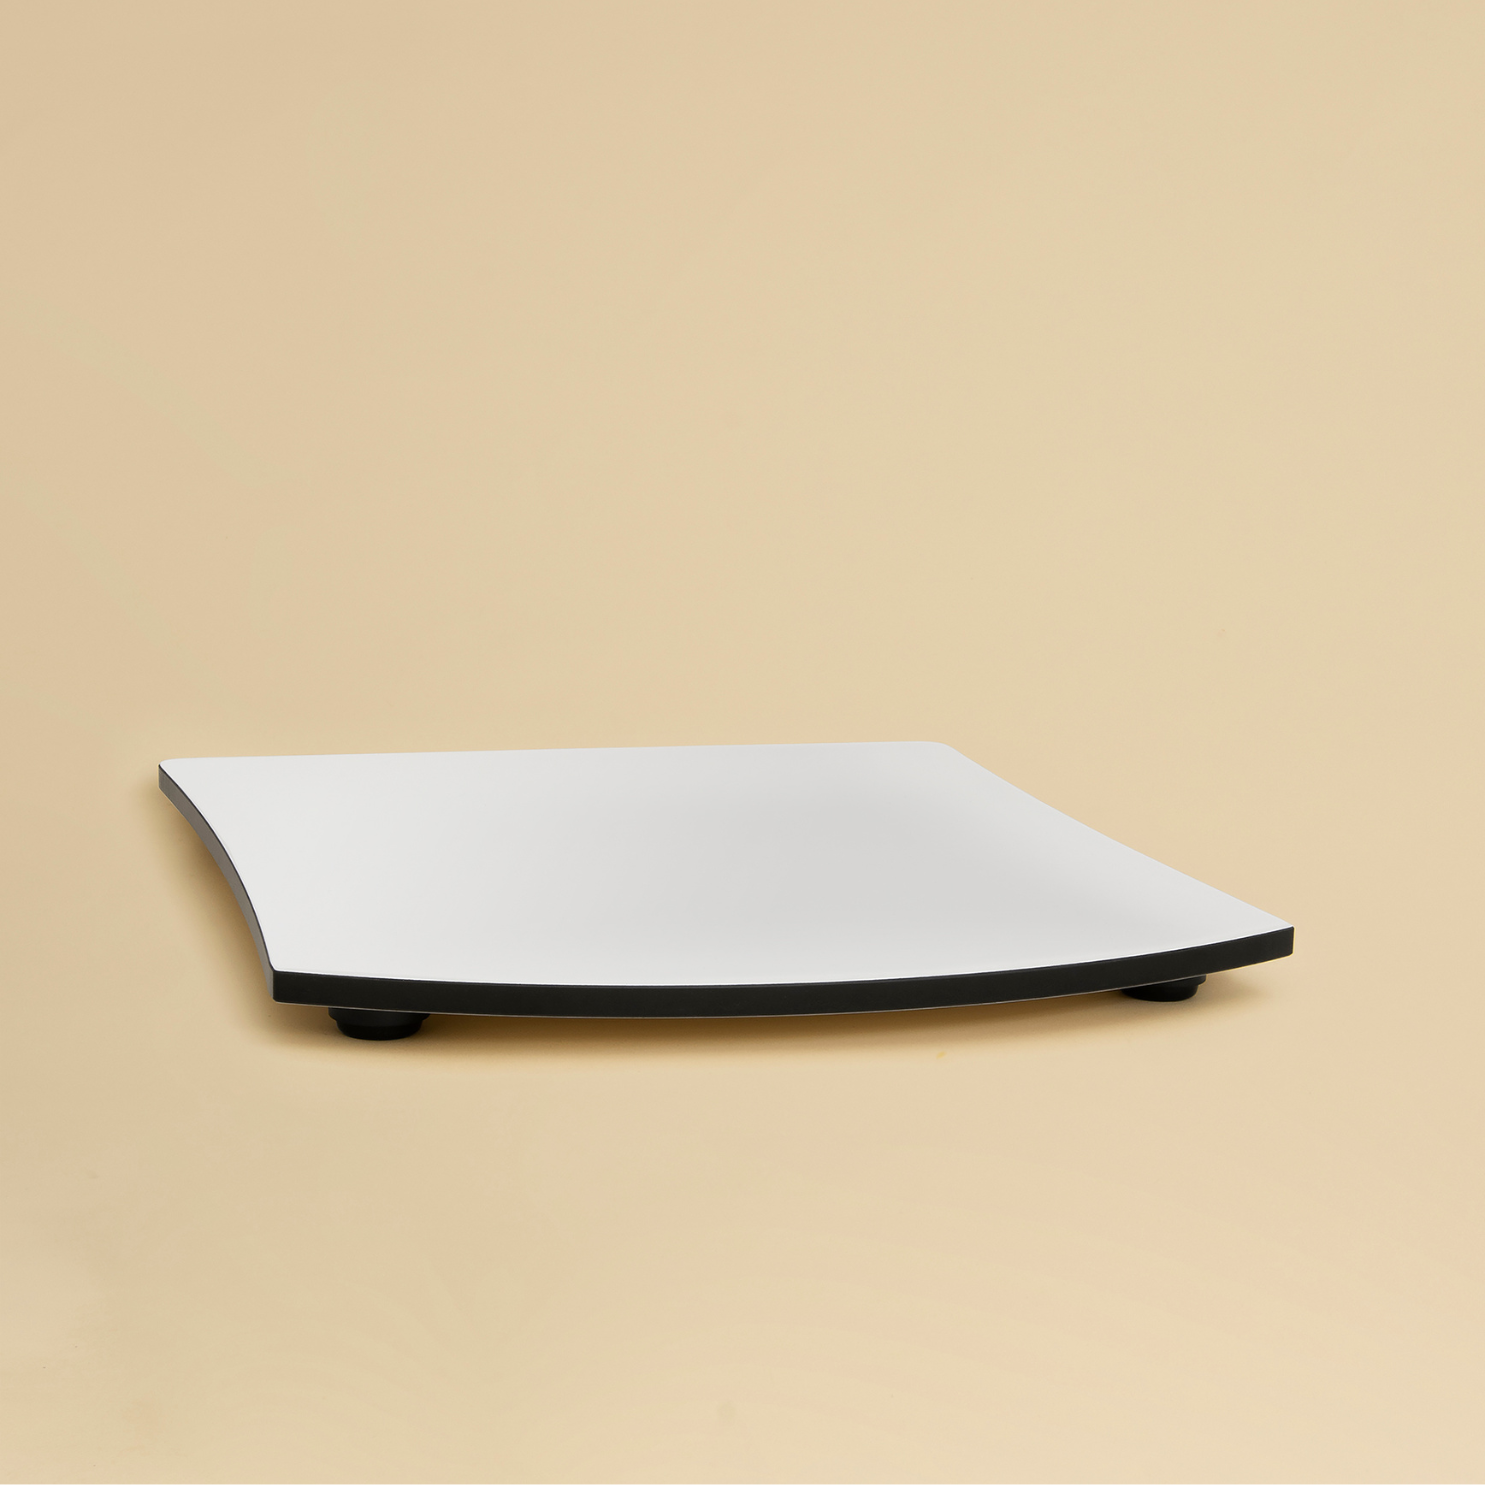 B-stock: Sliding board suitable for the Thermomix TM6 and TM5 made of HPL in pearl white